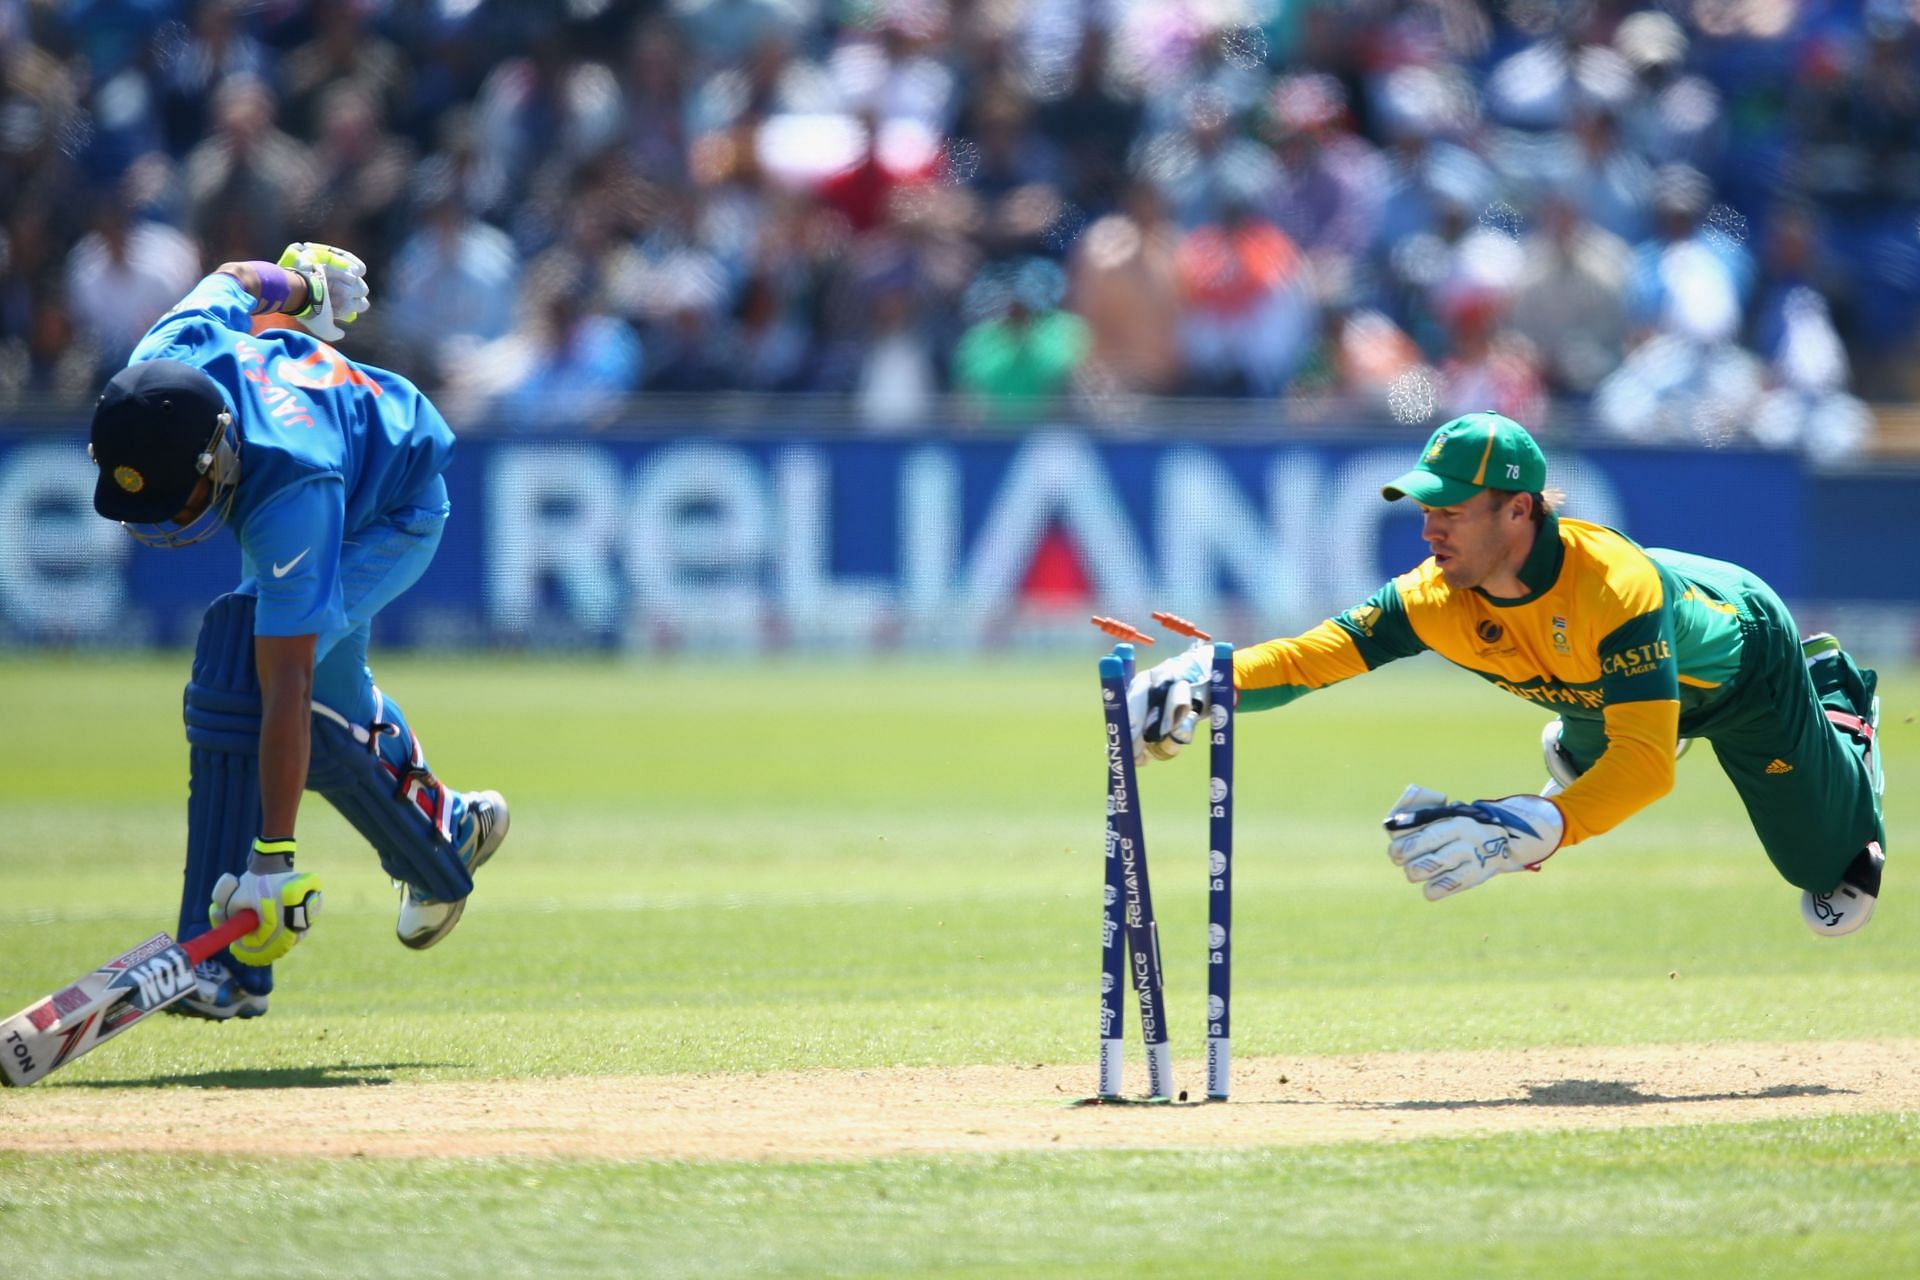 De Villiers (R) could do everything on a cricket field